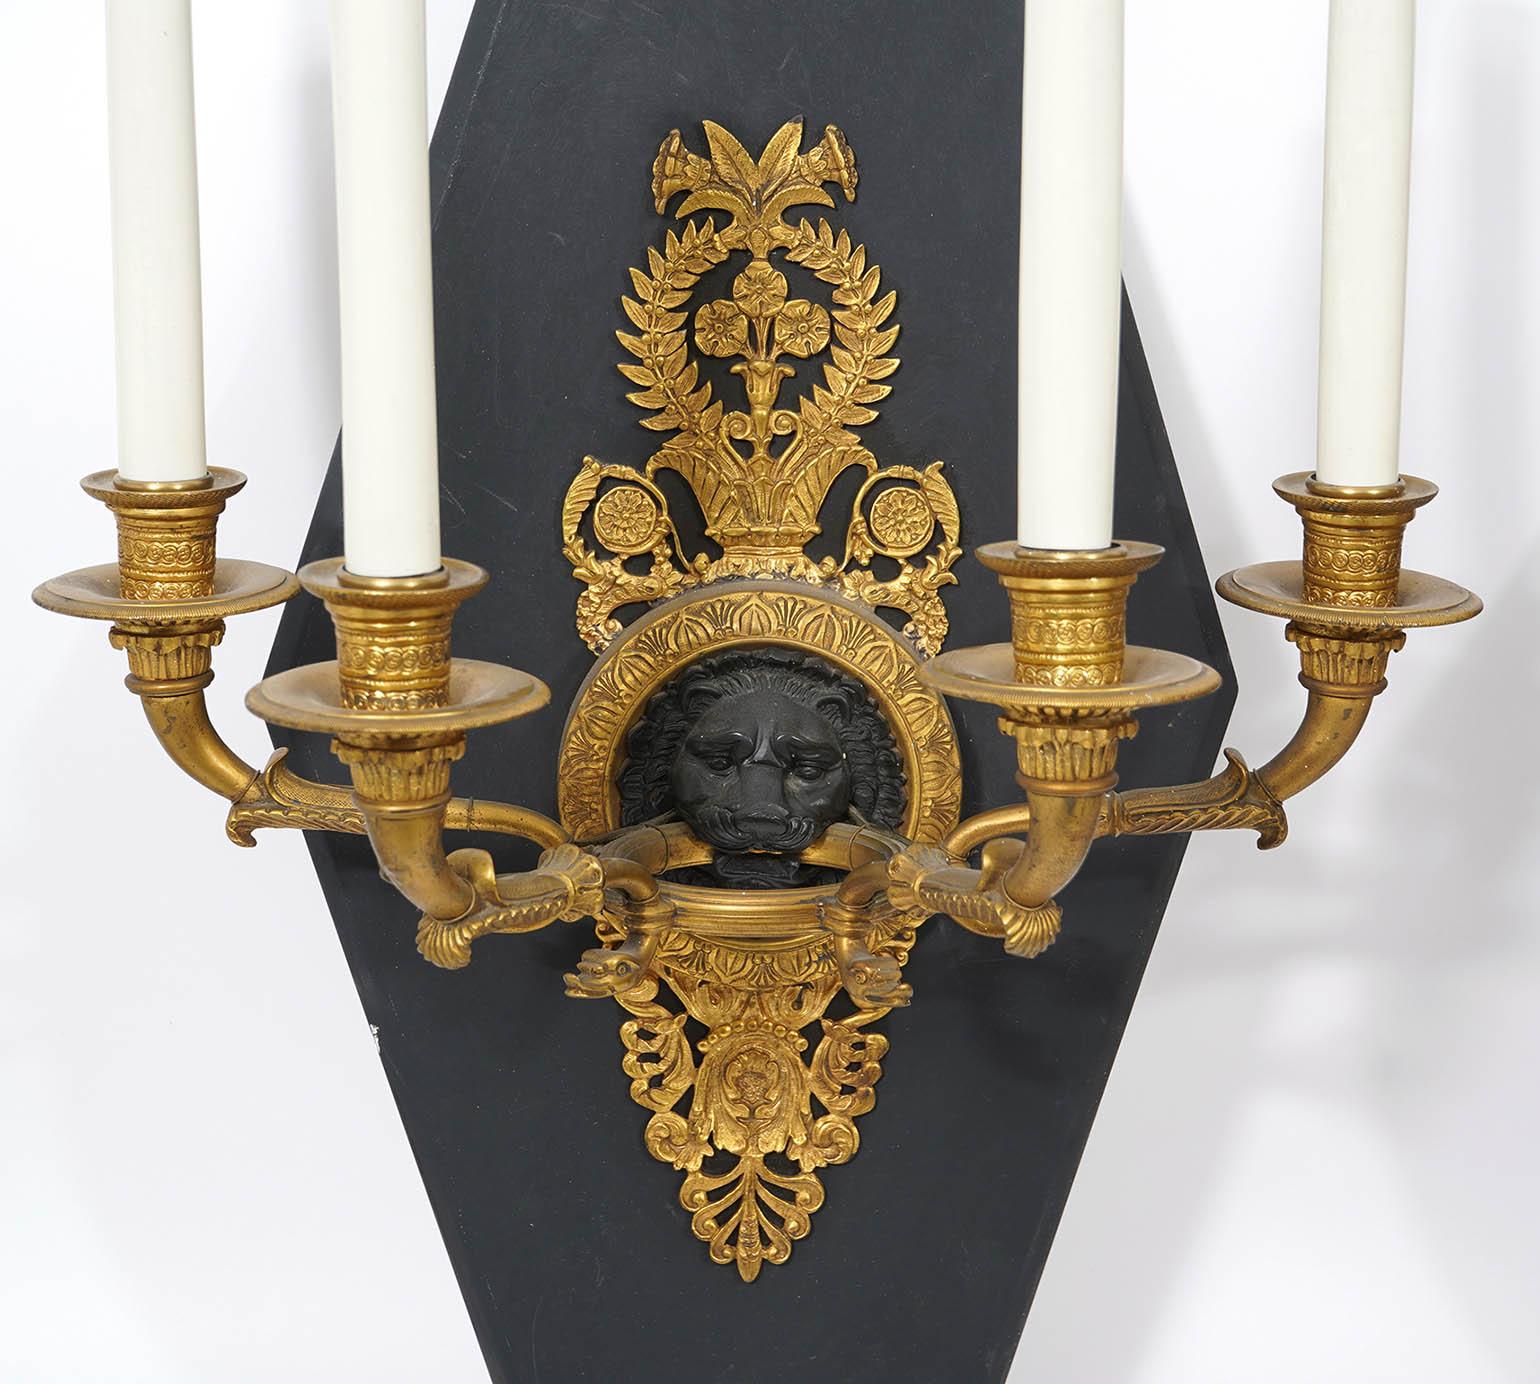 Fabulous pair of French gilt bronze empire sconces. Lion with open mouth holding up the candelabra. 19th Century, circa 1820's. Mounted later on wood backs to help mount on wall (Can be removed). Well detailed bronze work with Lion's mouth holding